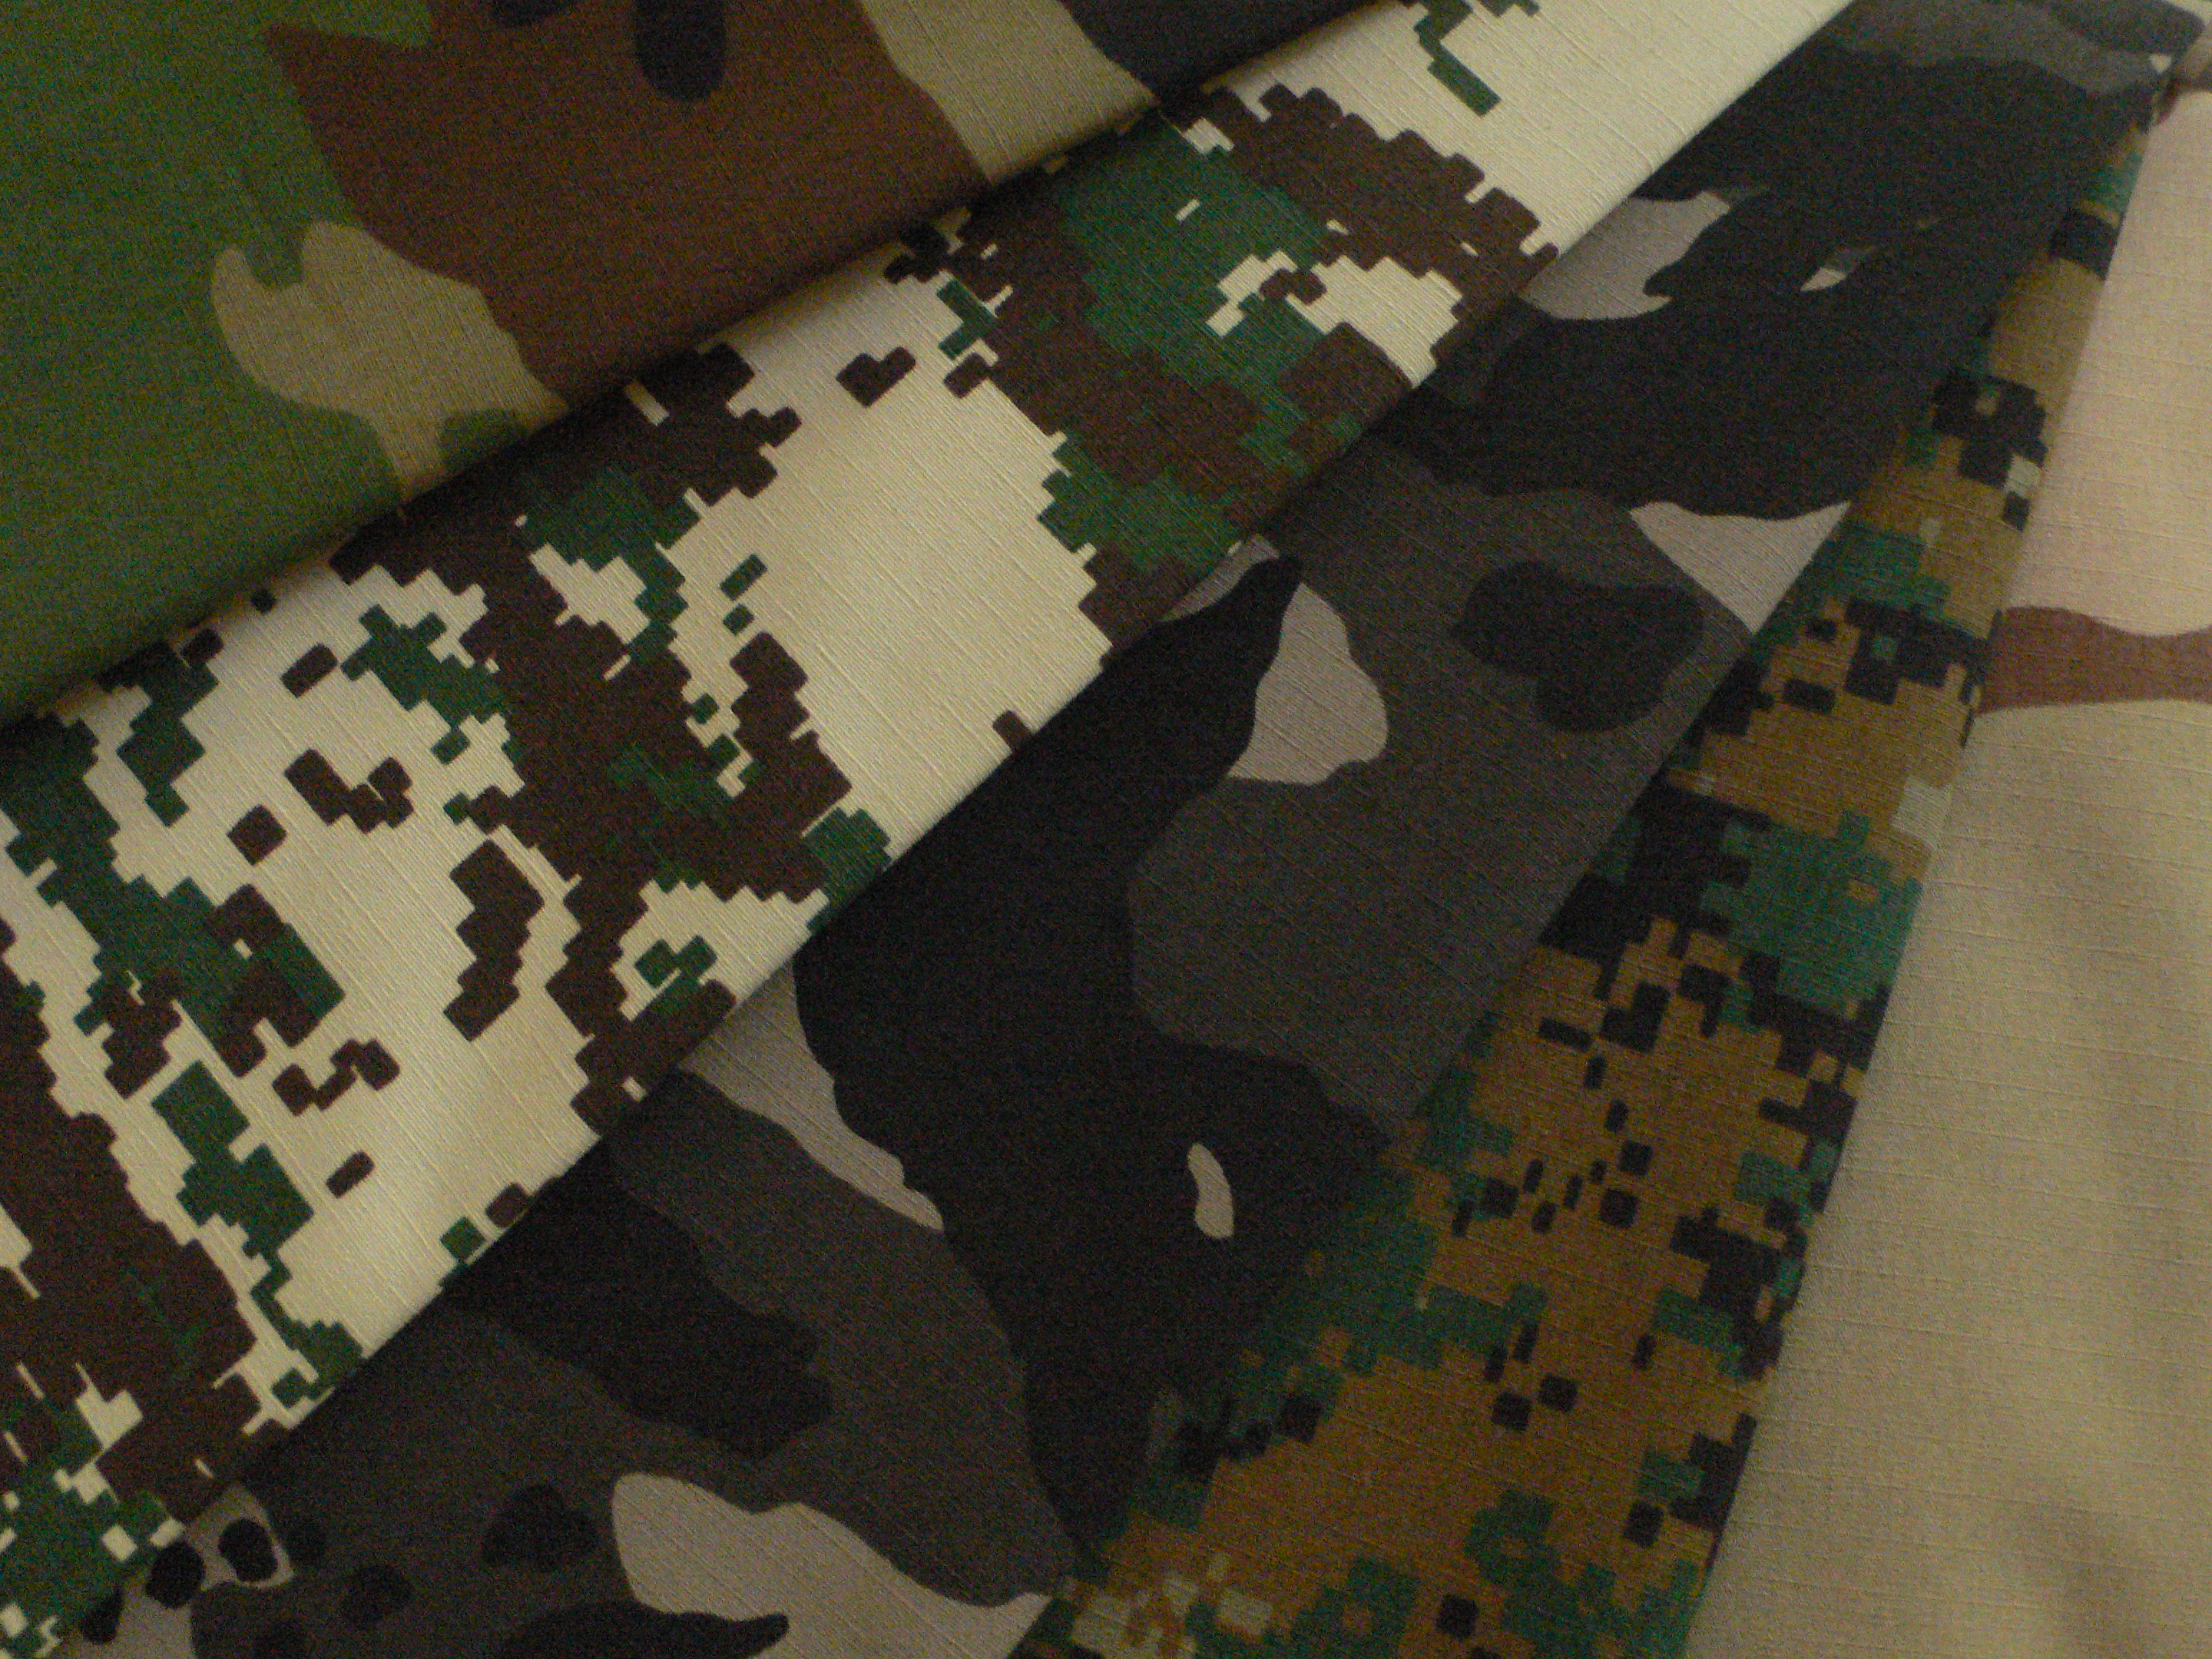 TC  Camouflage Fabric for the Middle East